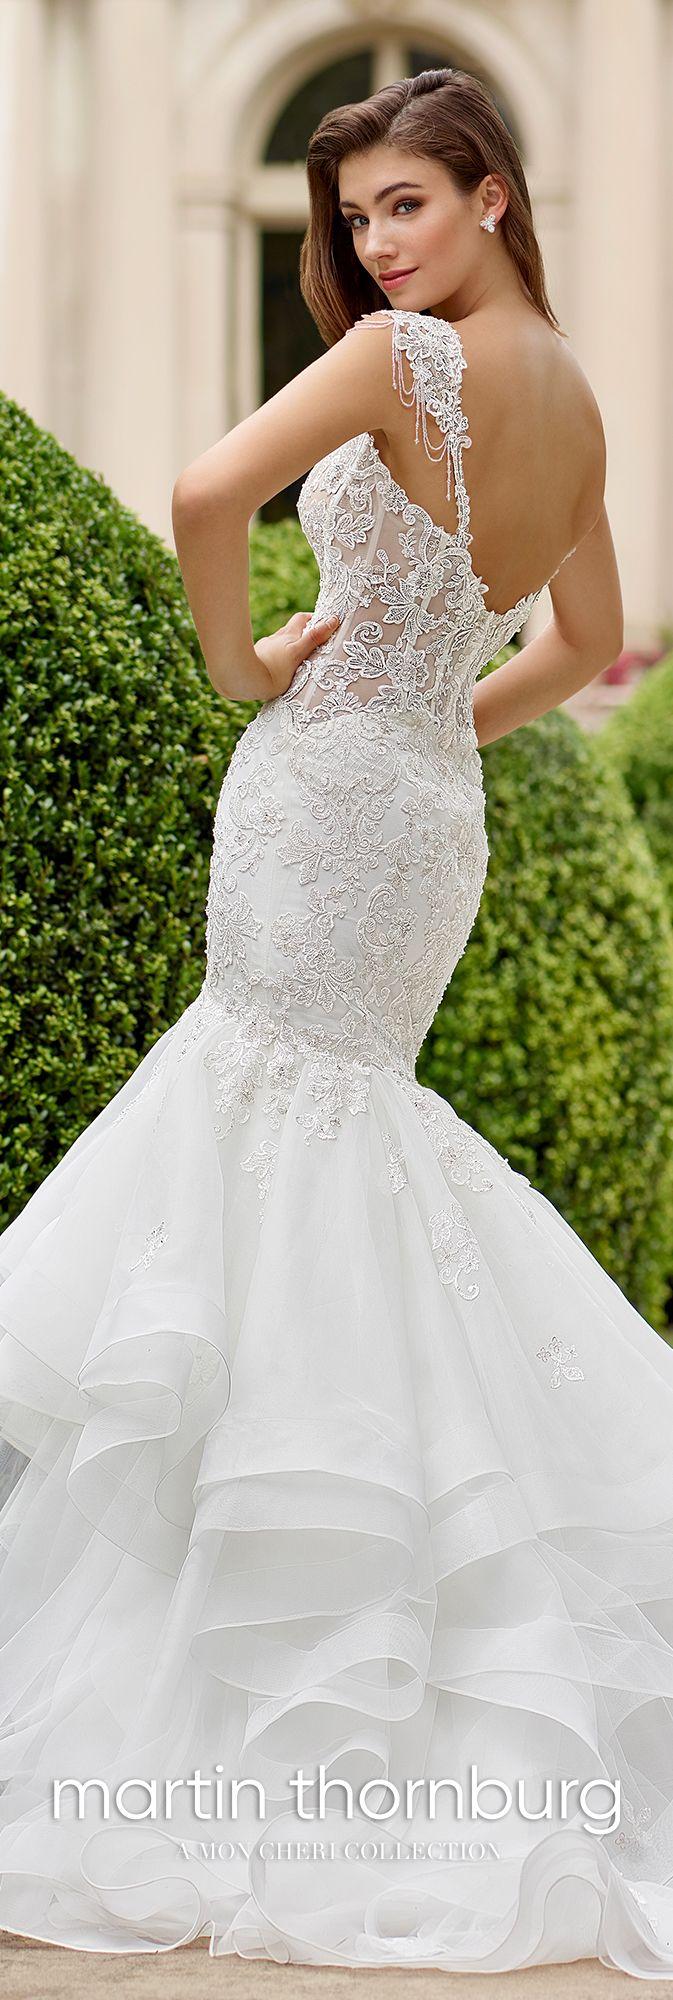 Wedding - Tulle, Organza, & Lace Trumpet Wedding Gown- 118279 Cantata